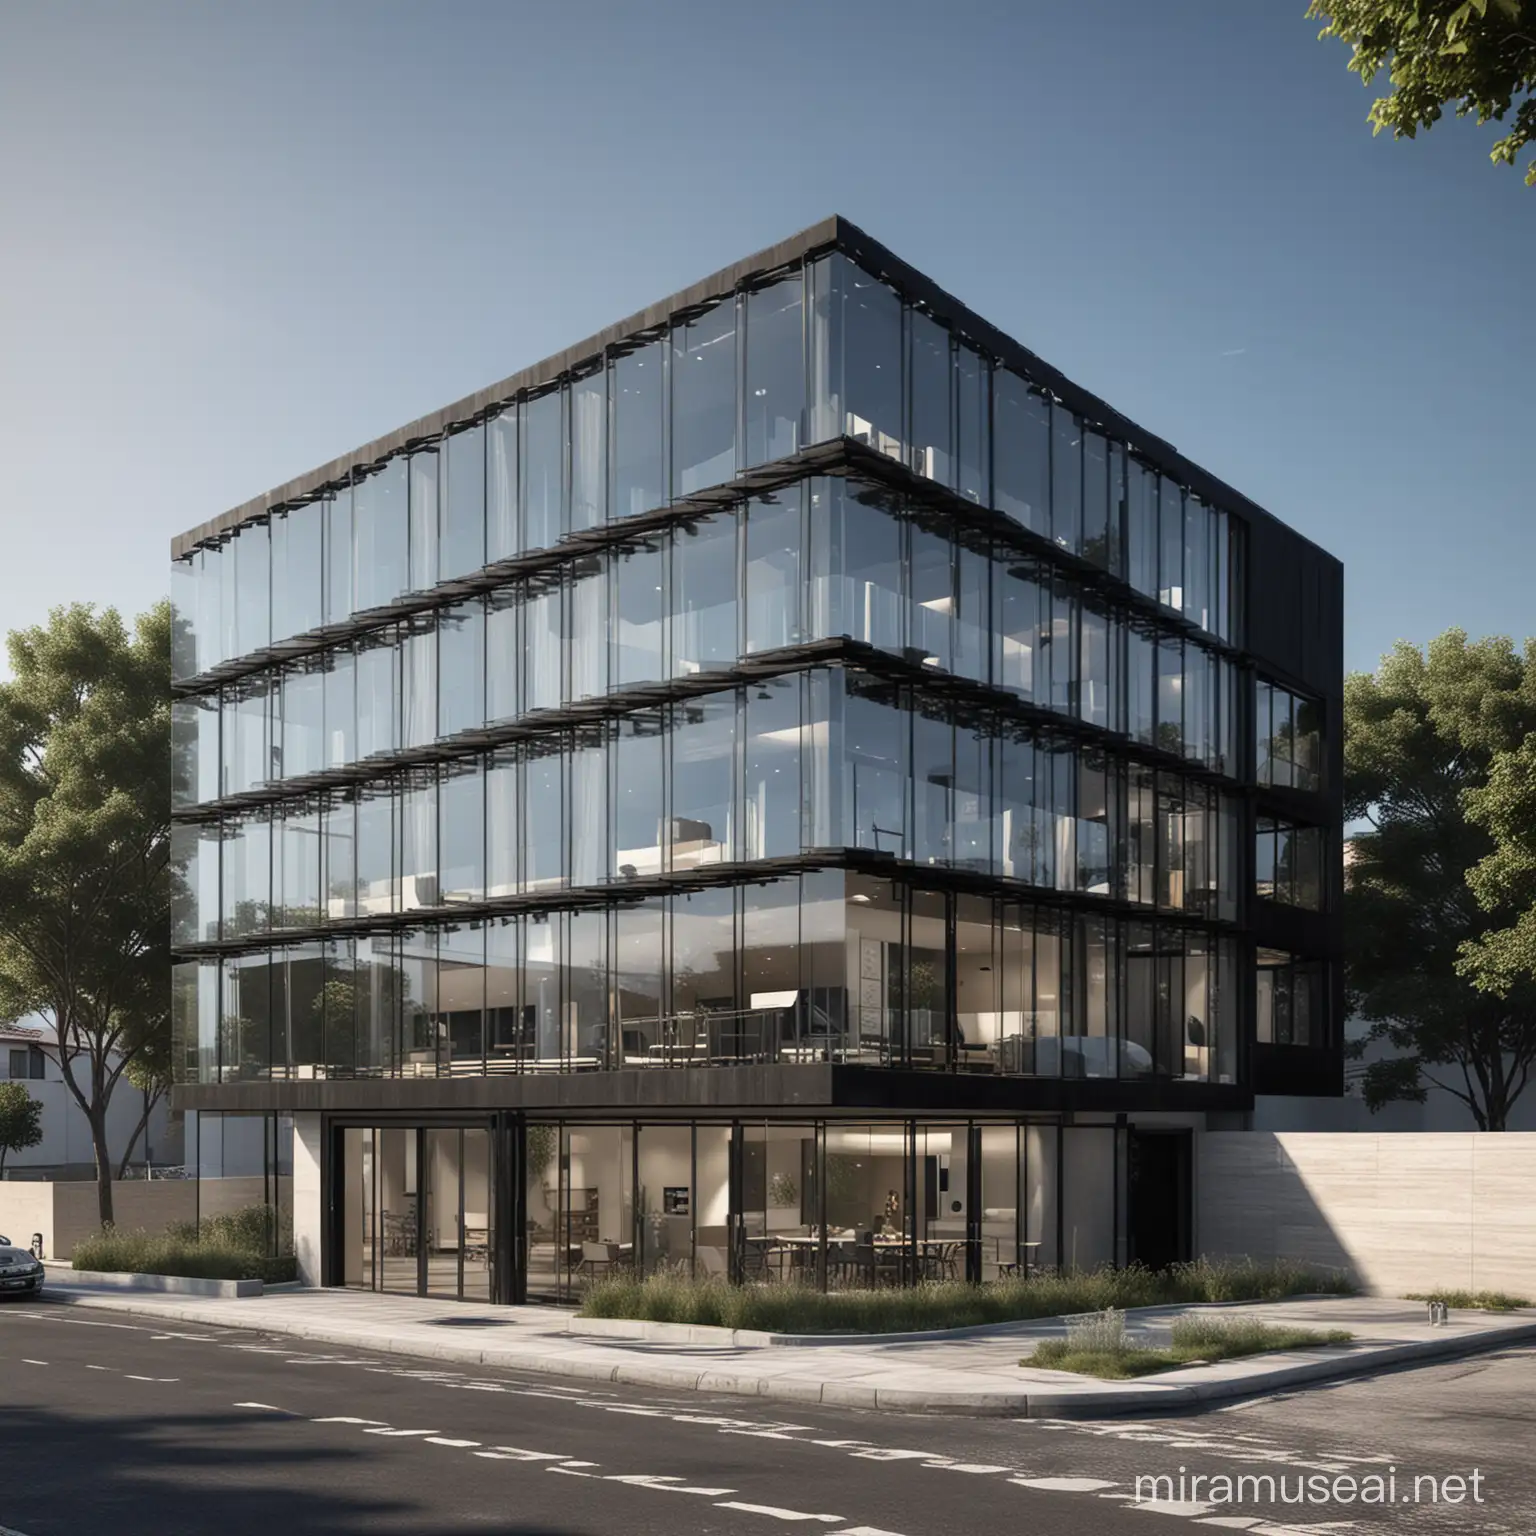 This is a psychologist clinic. It will have 5 floors and will have a terrace roof. Glass should be used on the facade and black wood should be used.